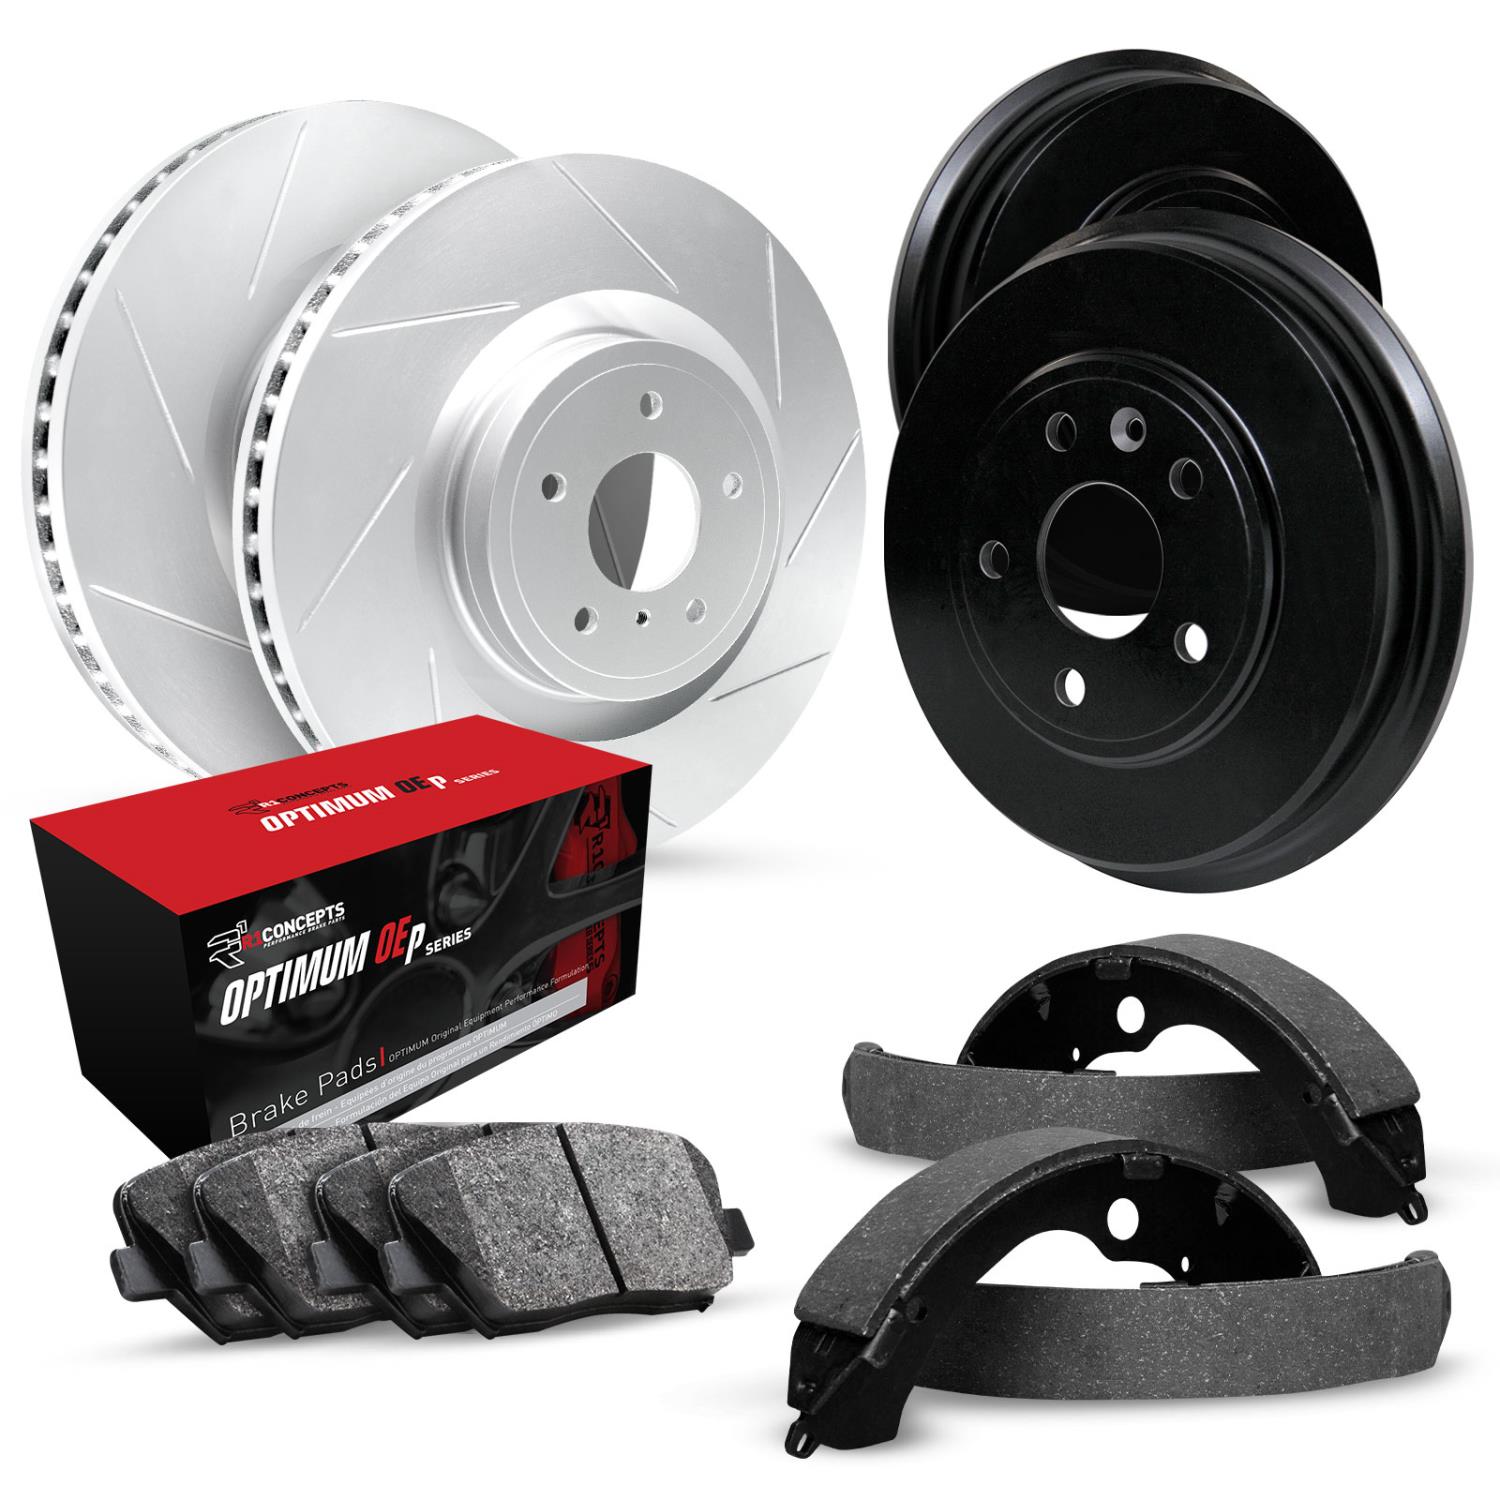 GEO-Carbon Slotted Brake Rotor & Drum Set w/Optimum OE Pads & Shoes, 1986-1994 Ford/Lincoln/Mercury/Mazda